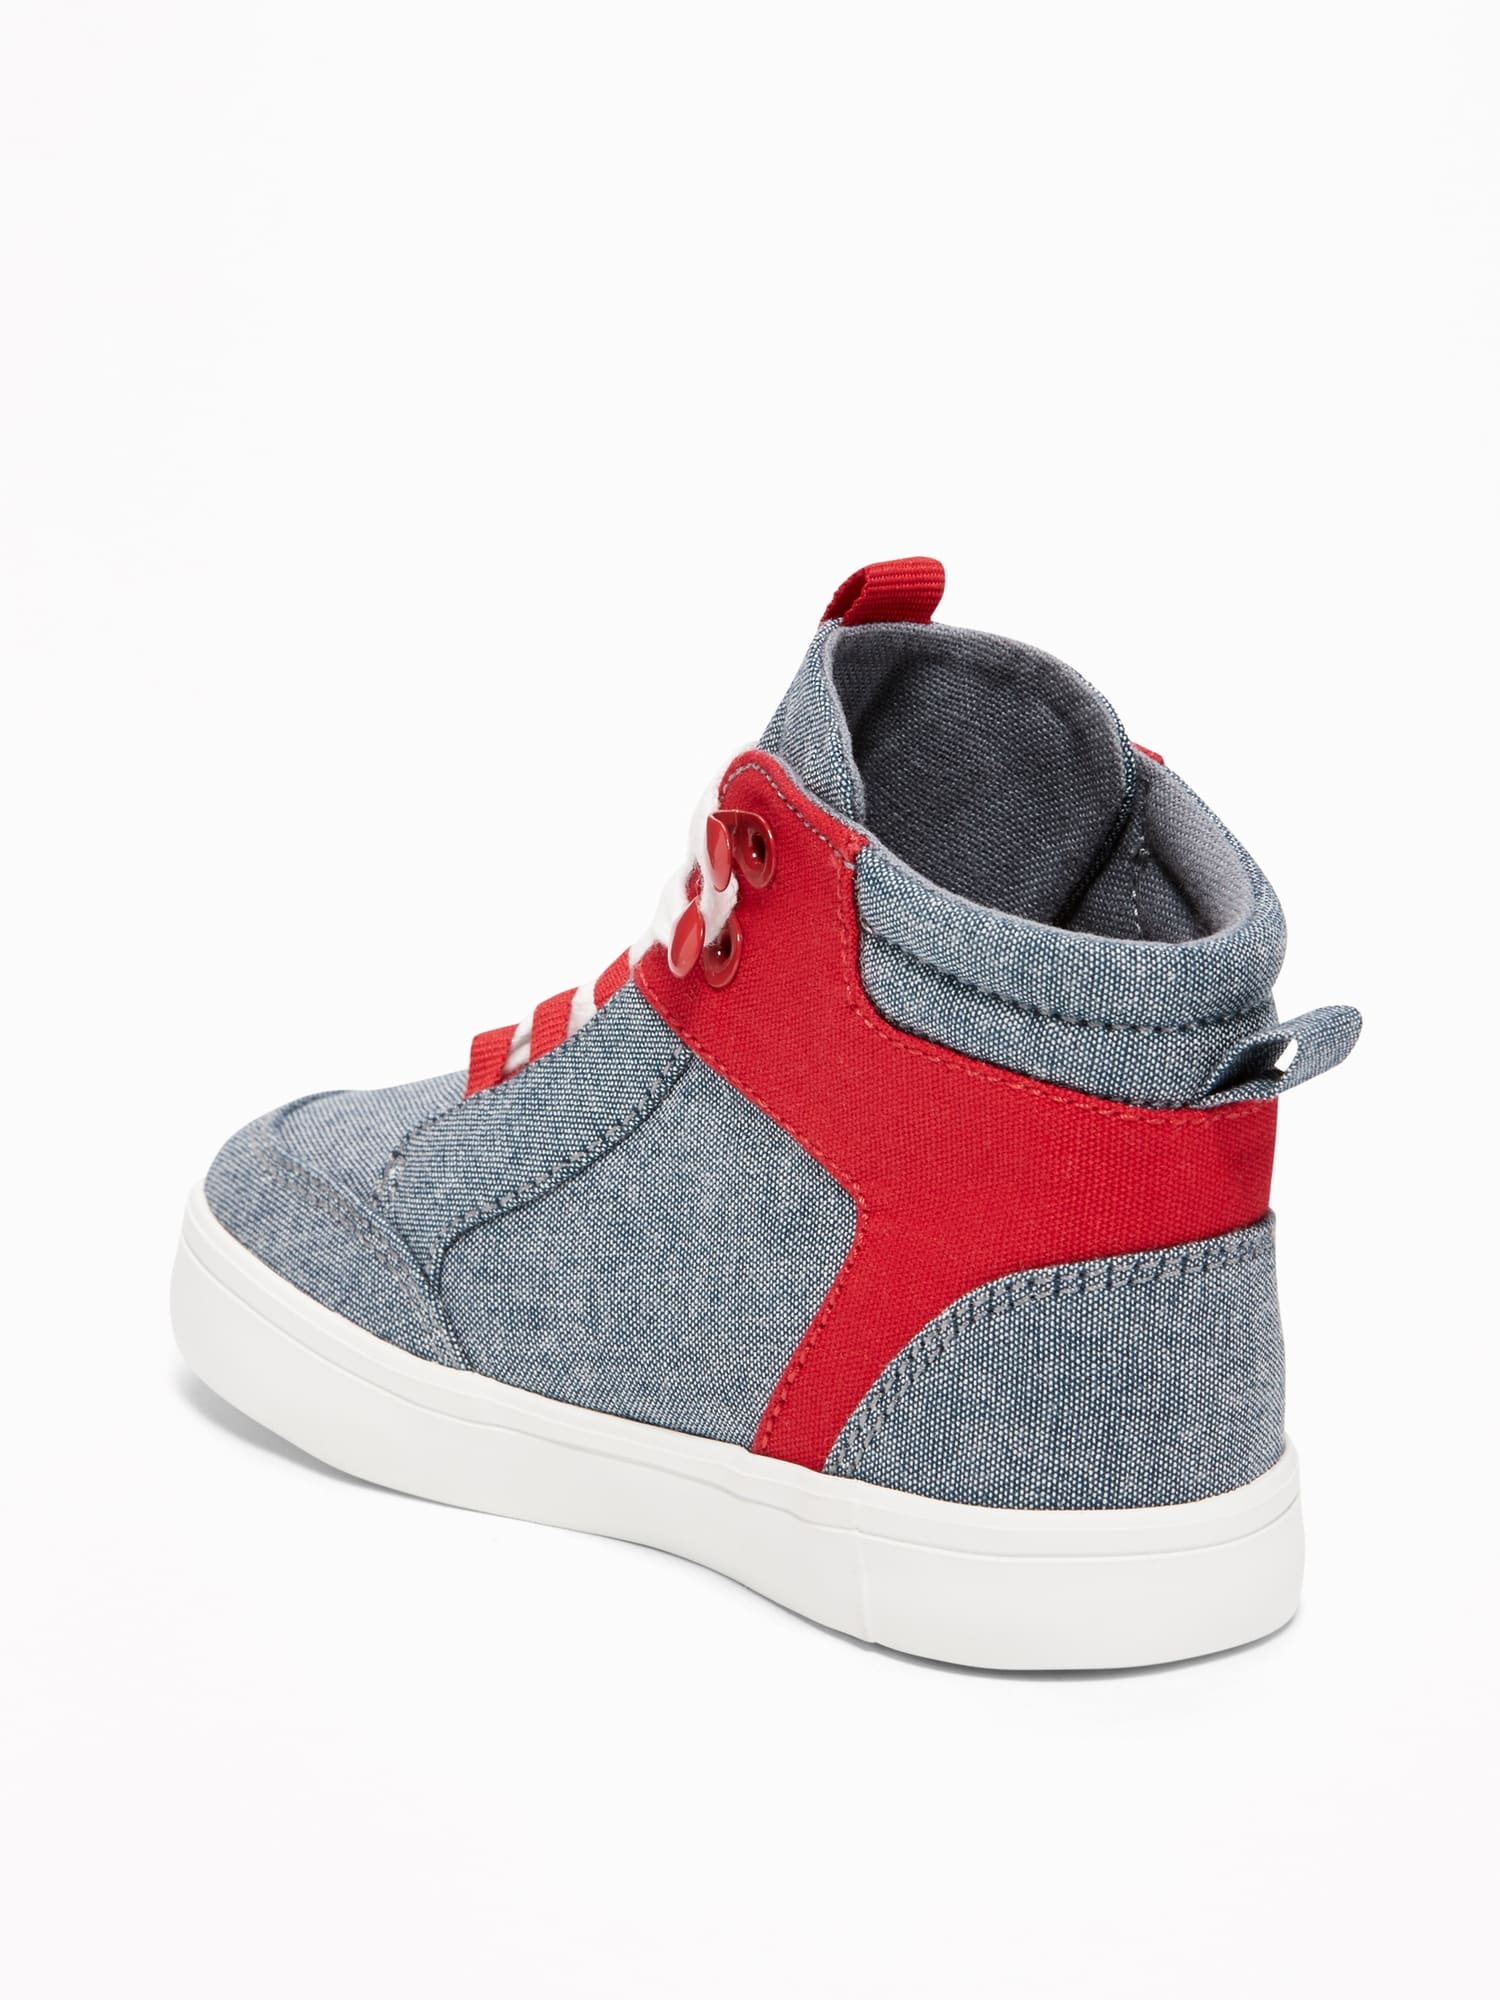 Chambray High-Tops for Toddler Boys | Old Navy